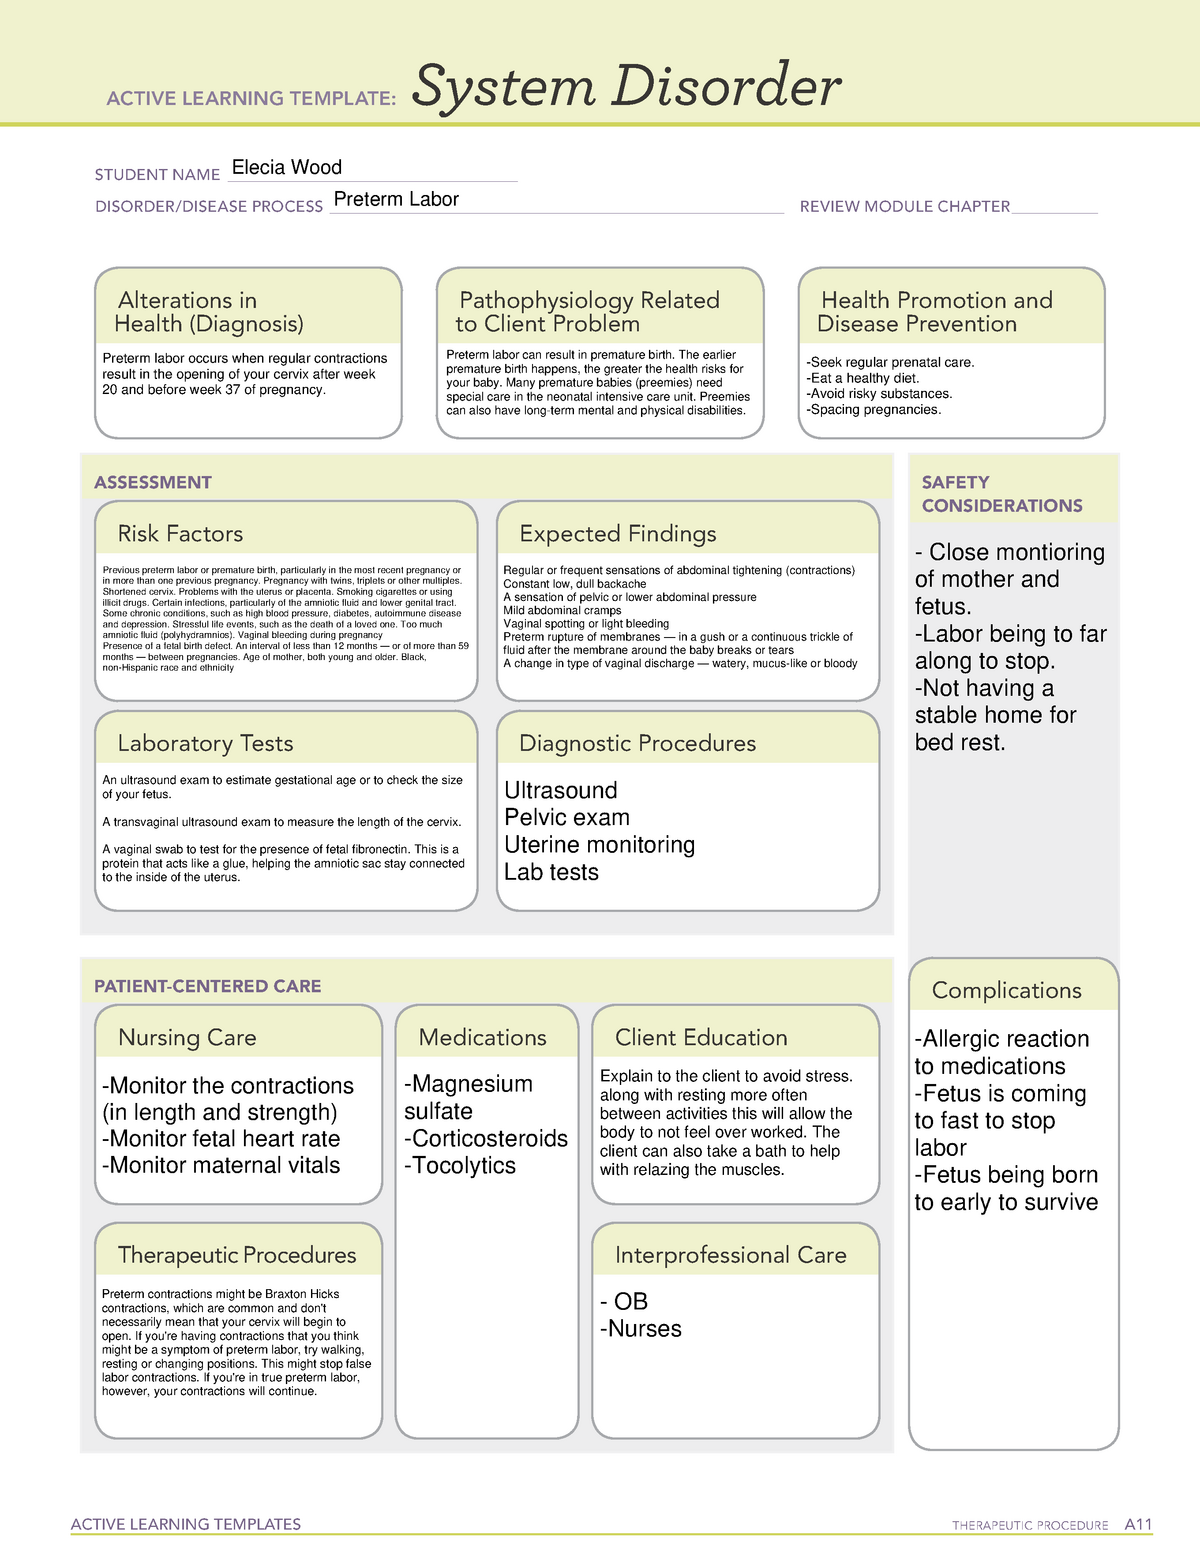 Preterm Labor Maternal Clinical 01252021 ACTIVE LEARNING TEMPLATES